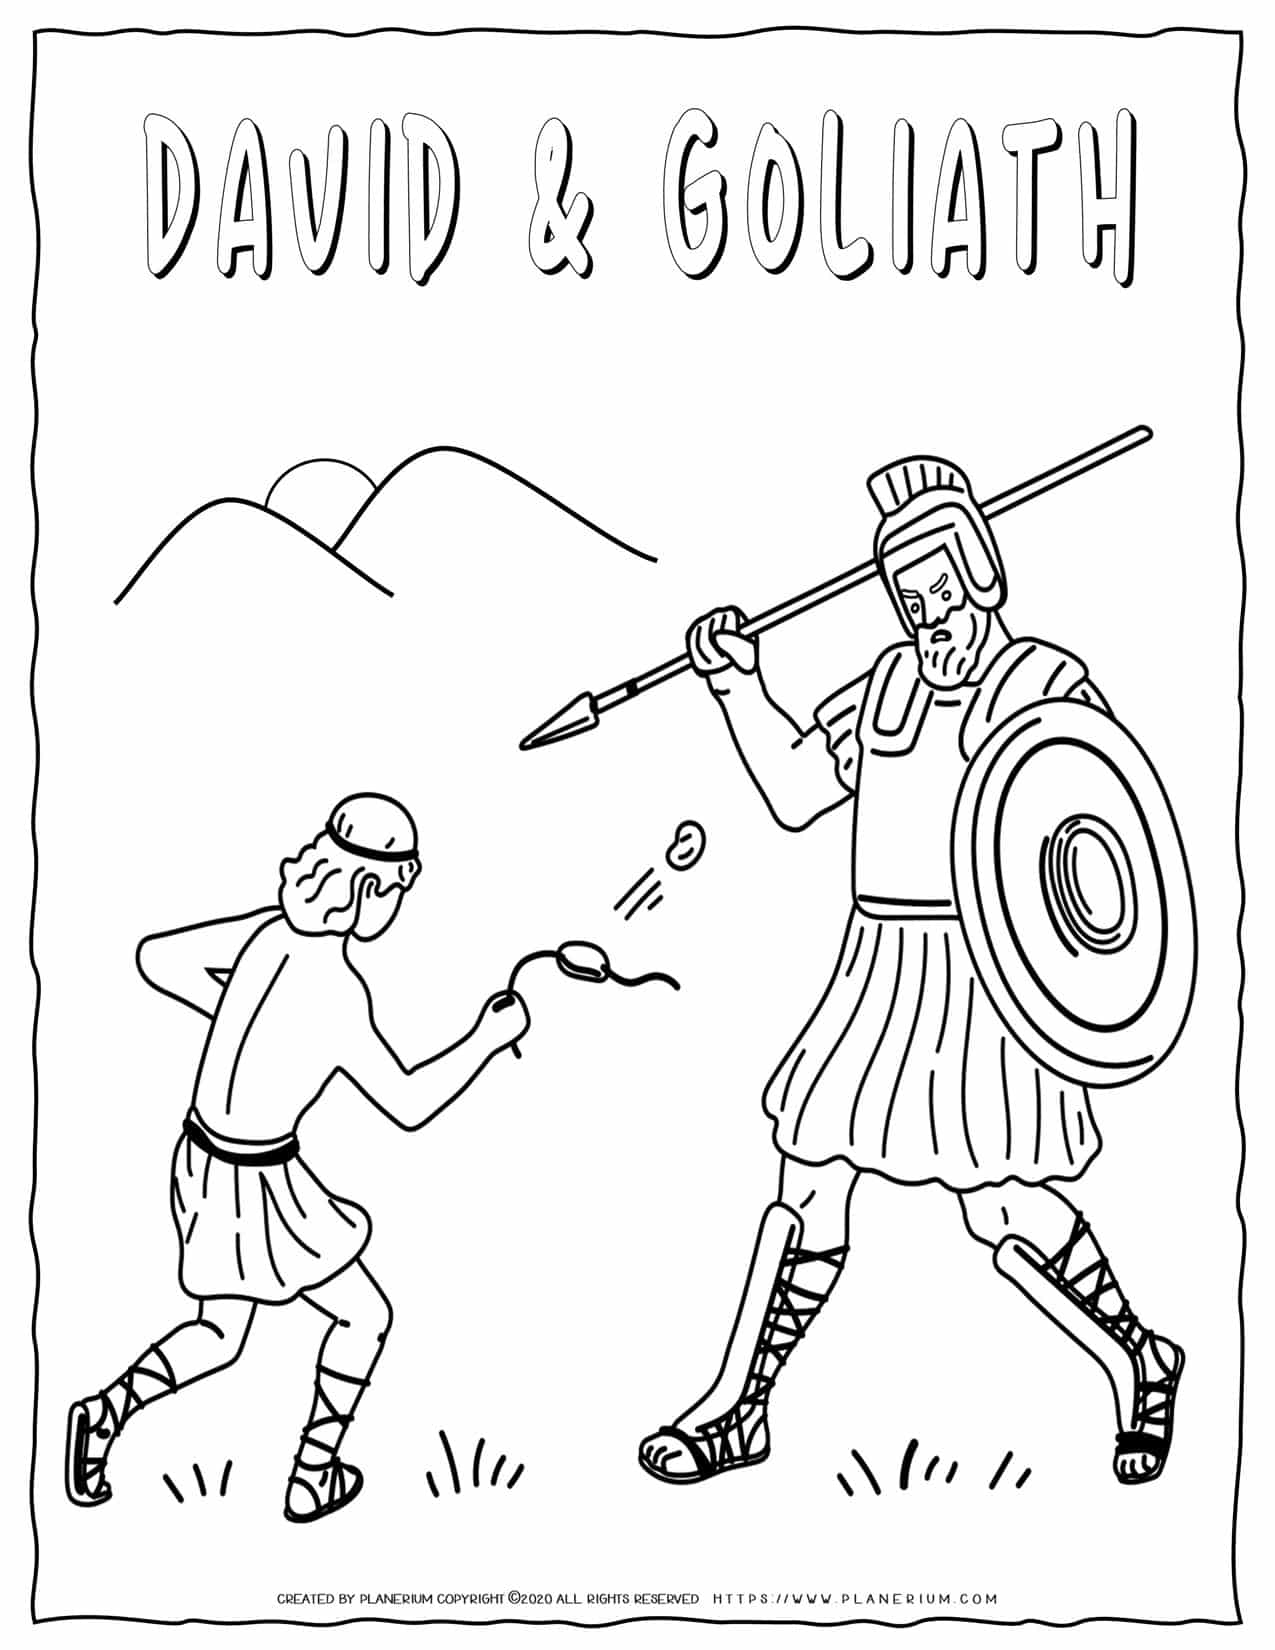 david-and-goliath-bible-coloring-pages-planerium